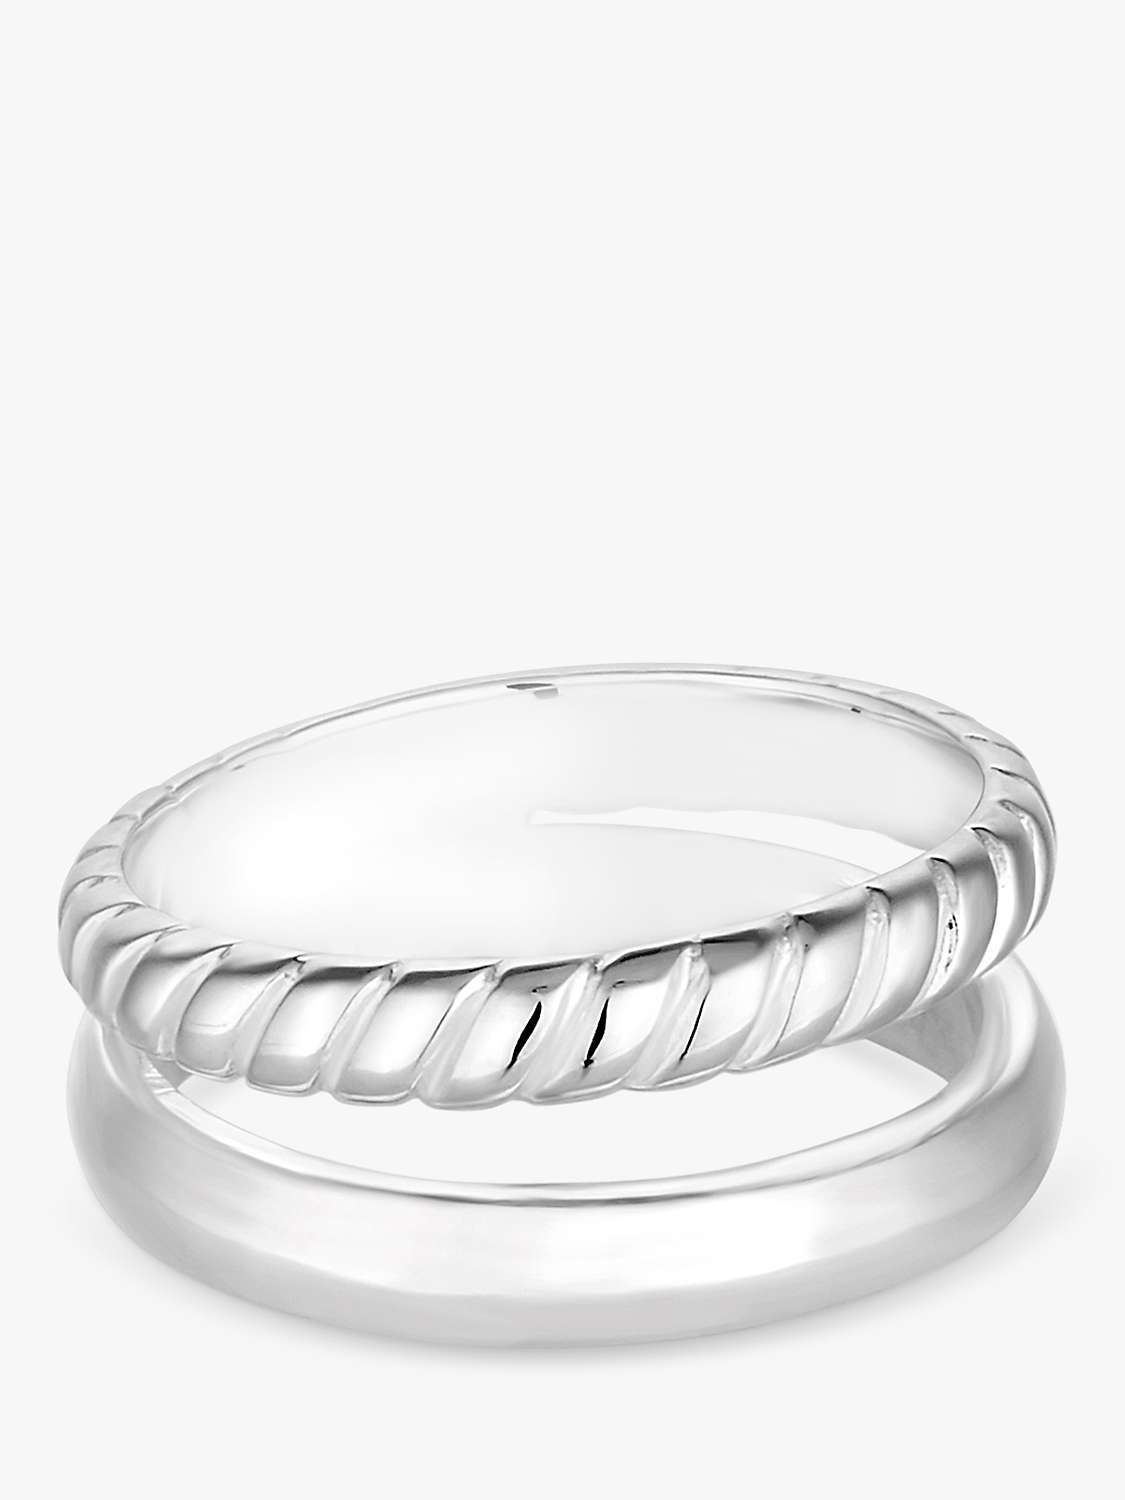 Buy Simply Silver Polished Sterling Silver Rope Ring, Silver Online at johnlewis.com